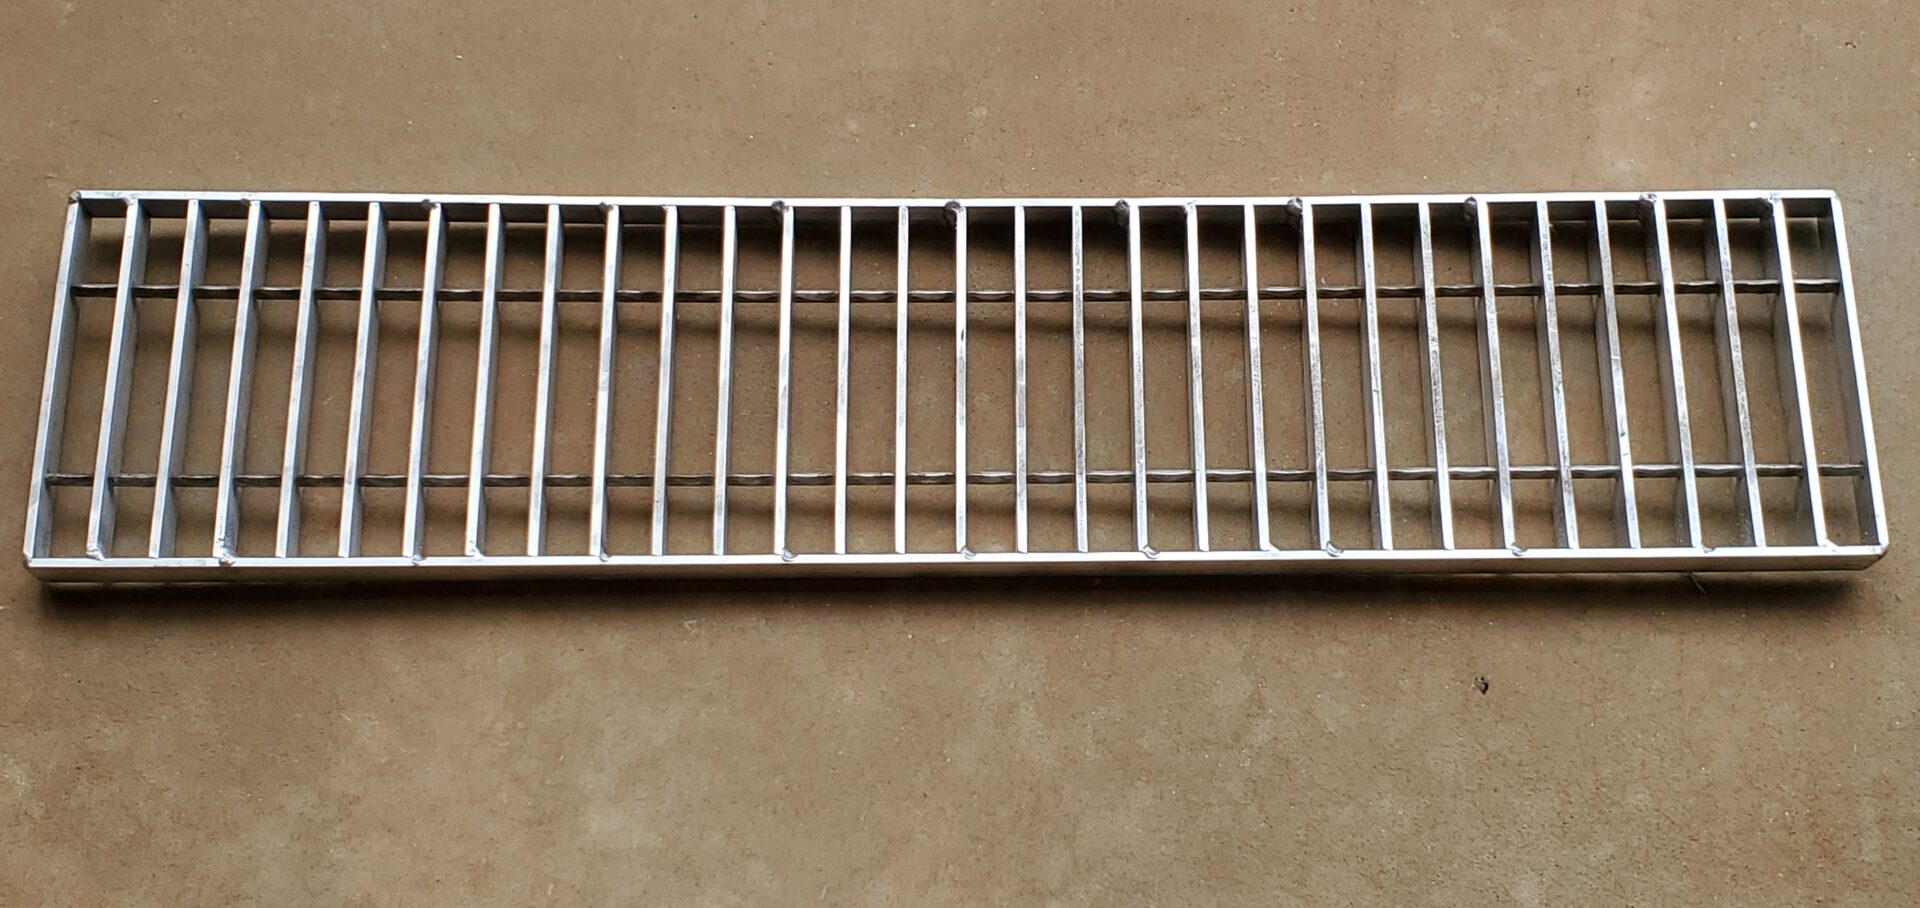 Replacement floor drain covers / grates / grilles